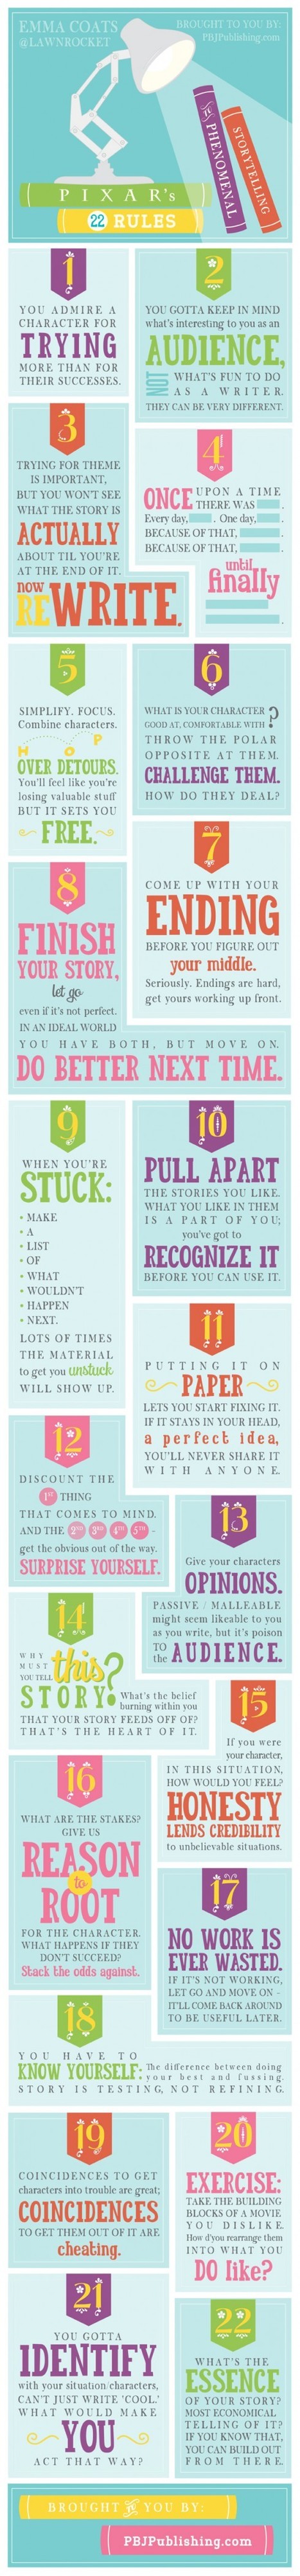 Pixar’s 22 Rules to Phenomenal Storytelling [INFOGRAPHIC] | Latest Social Media News | Scoop.it